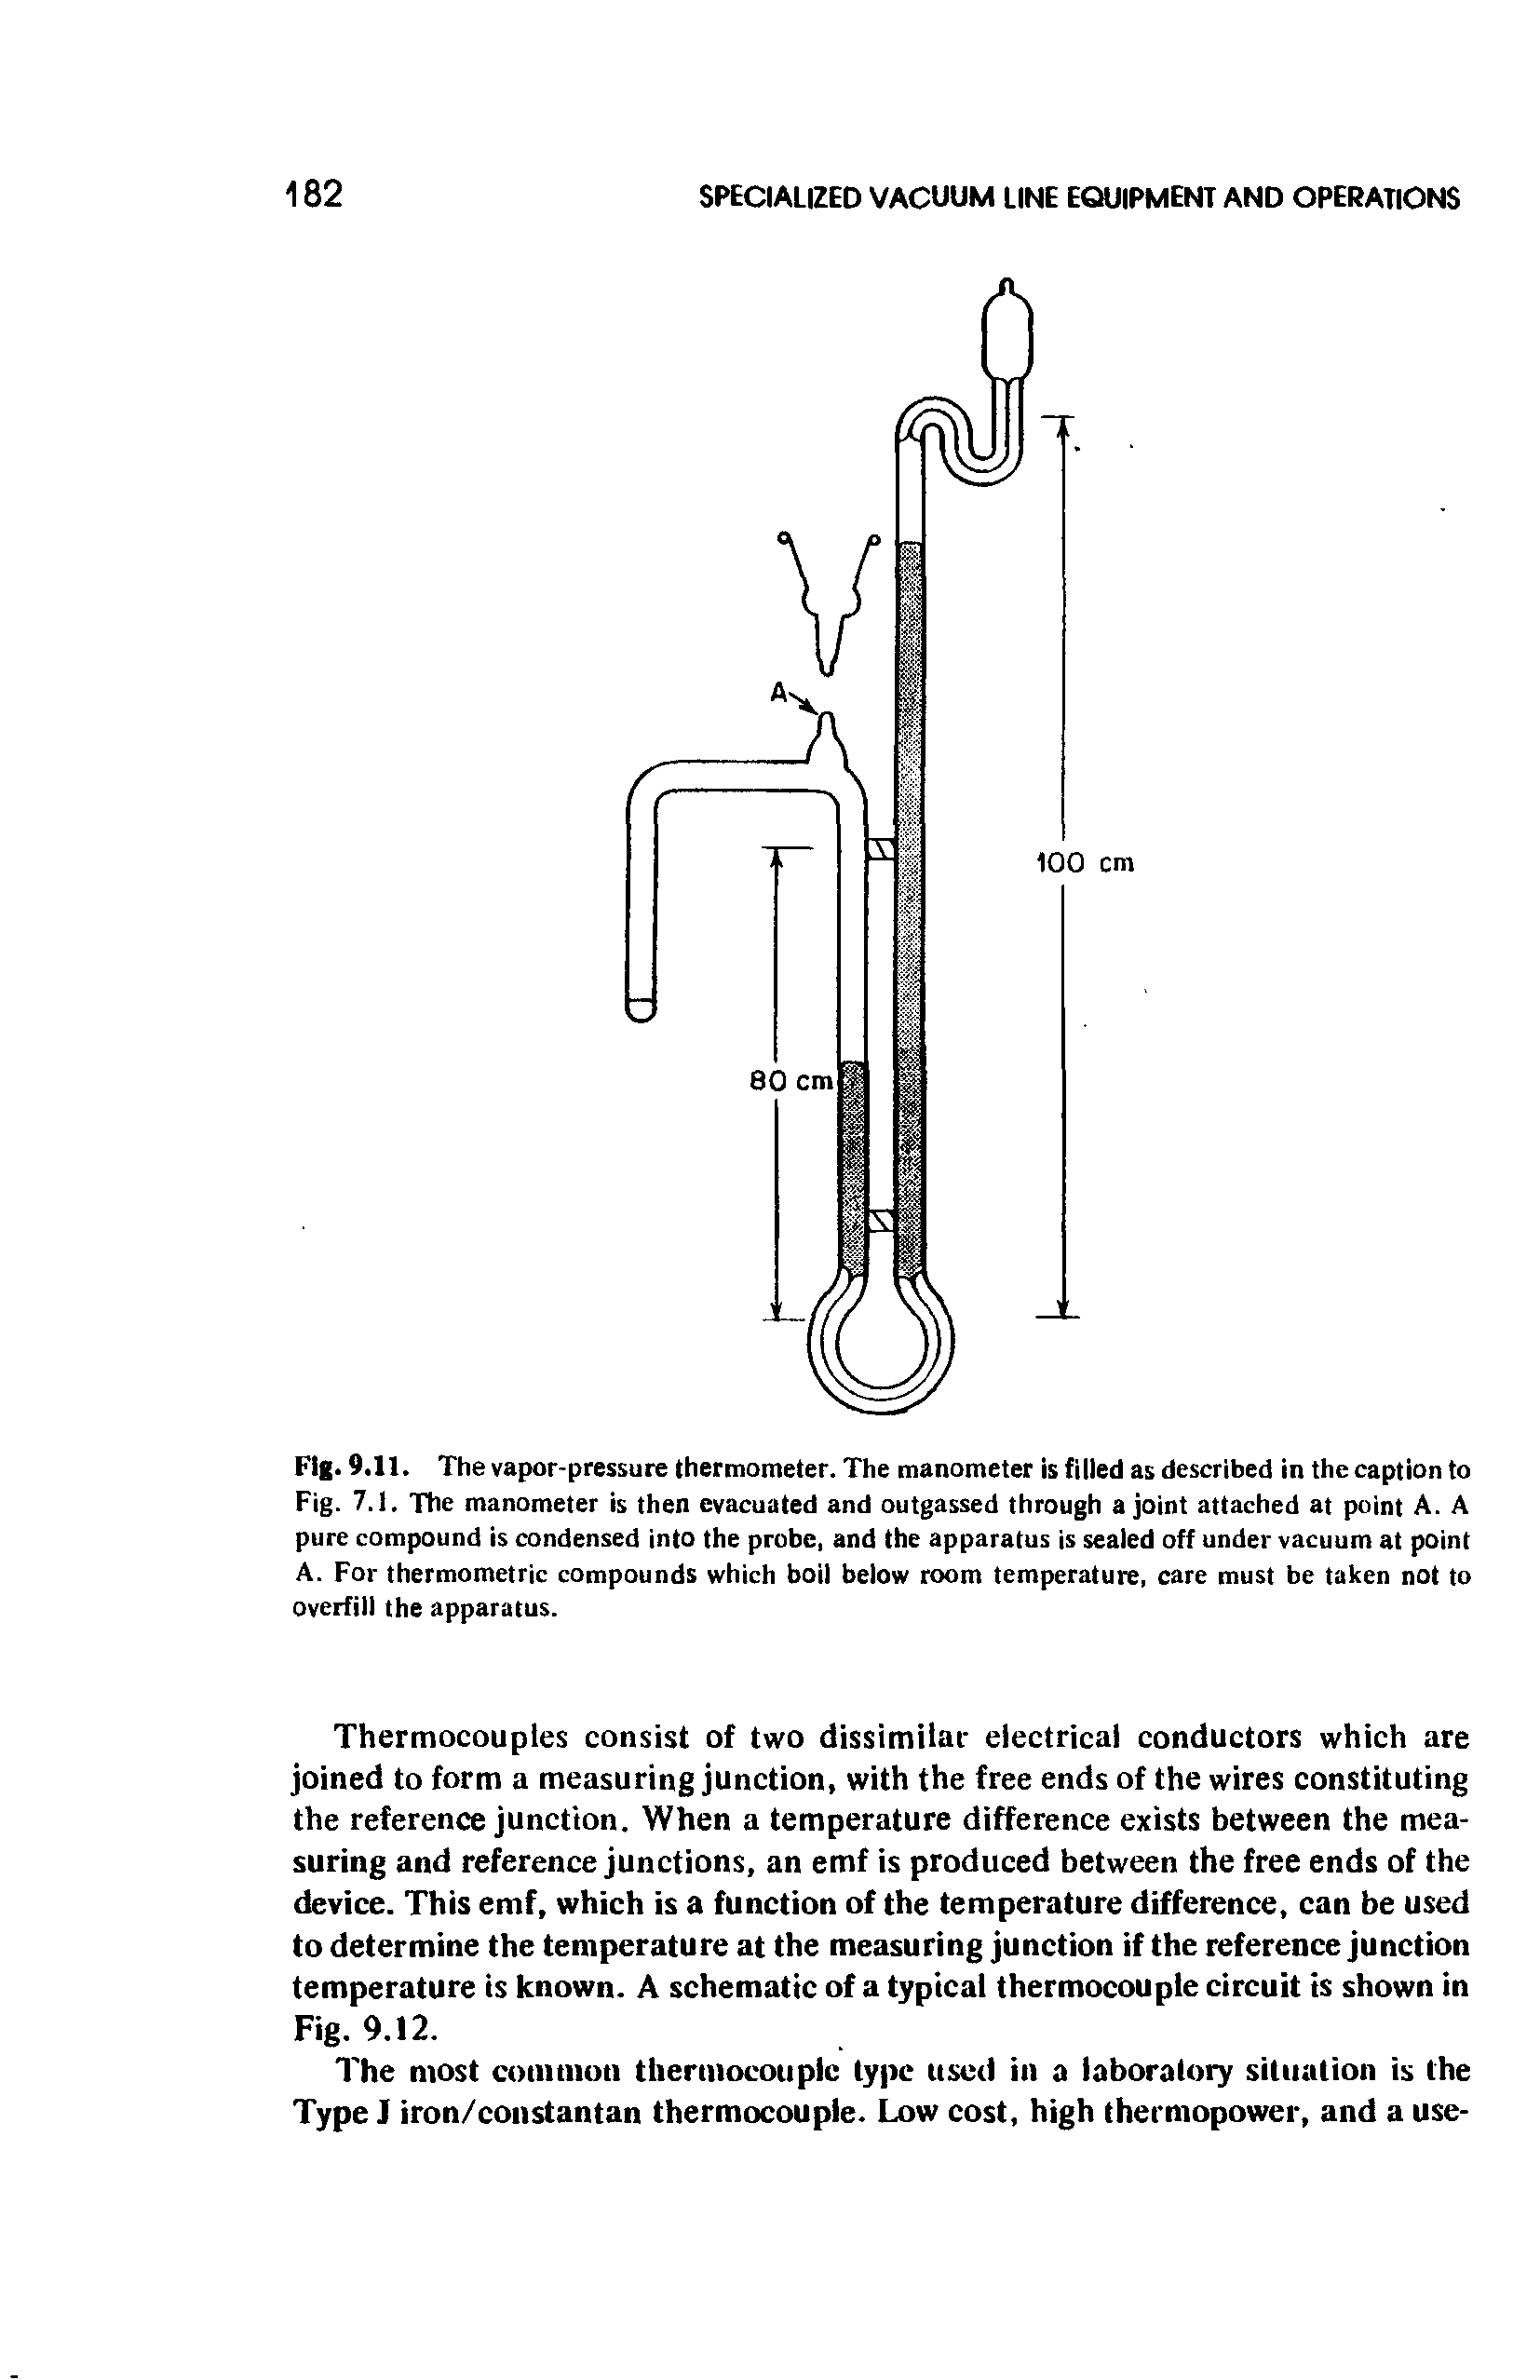 Fig. 9.11. The vapor-pressure thermometer. The manometer is filled as described in the caption to Fig. 7.1. The manometer is then evacuated and outgassed through a joint attached at point A. A pure compound is condensed into the probe, and the apparatus is sealed off under vacuum at point A. For thermometric compounds which boil below room temperature, care must be taken not to overfill the apparatus.